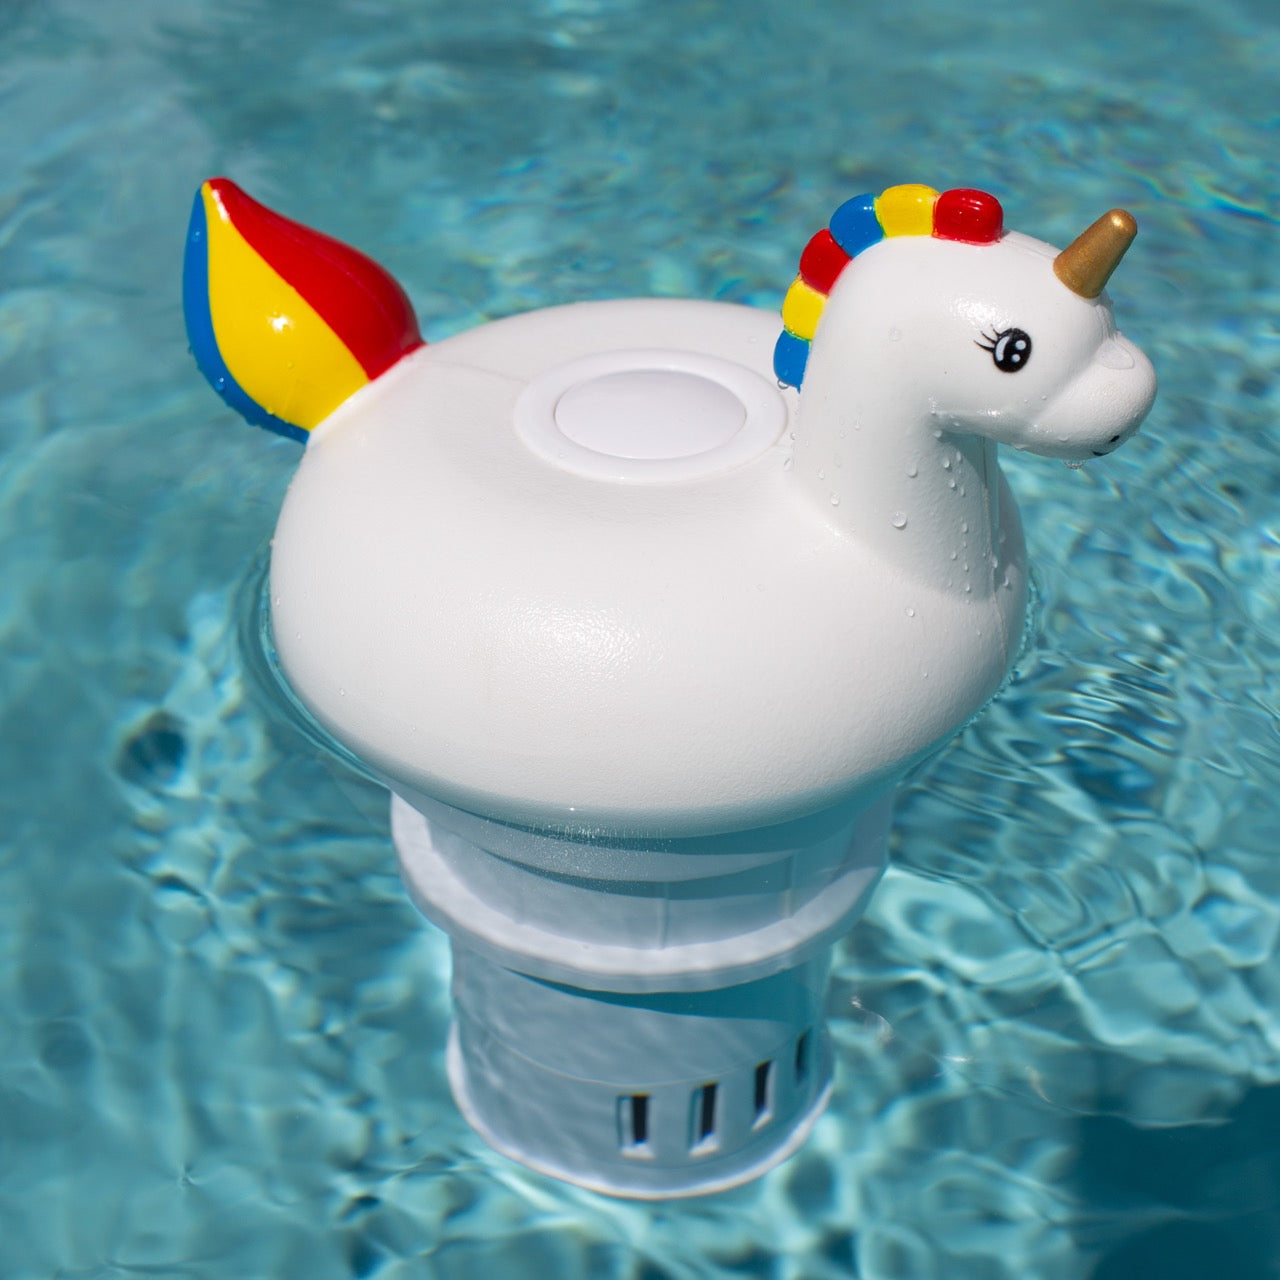 Blue Mano Unicorn Floating Chlorine Dispenser for 3 inch & 1 inch Chlorine  Tablets with Refill Warning, Durable Design, Unicorn Floater & Dispenser